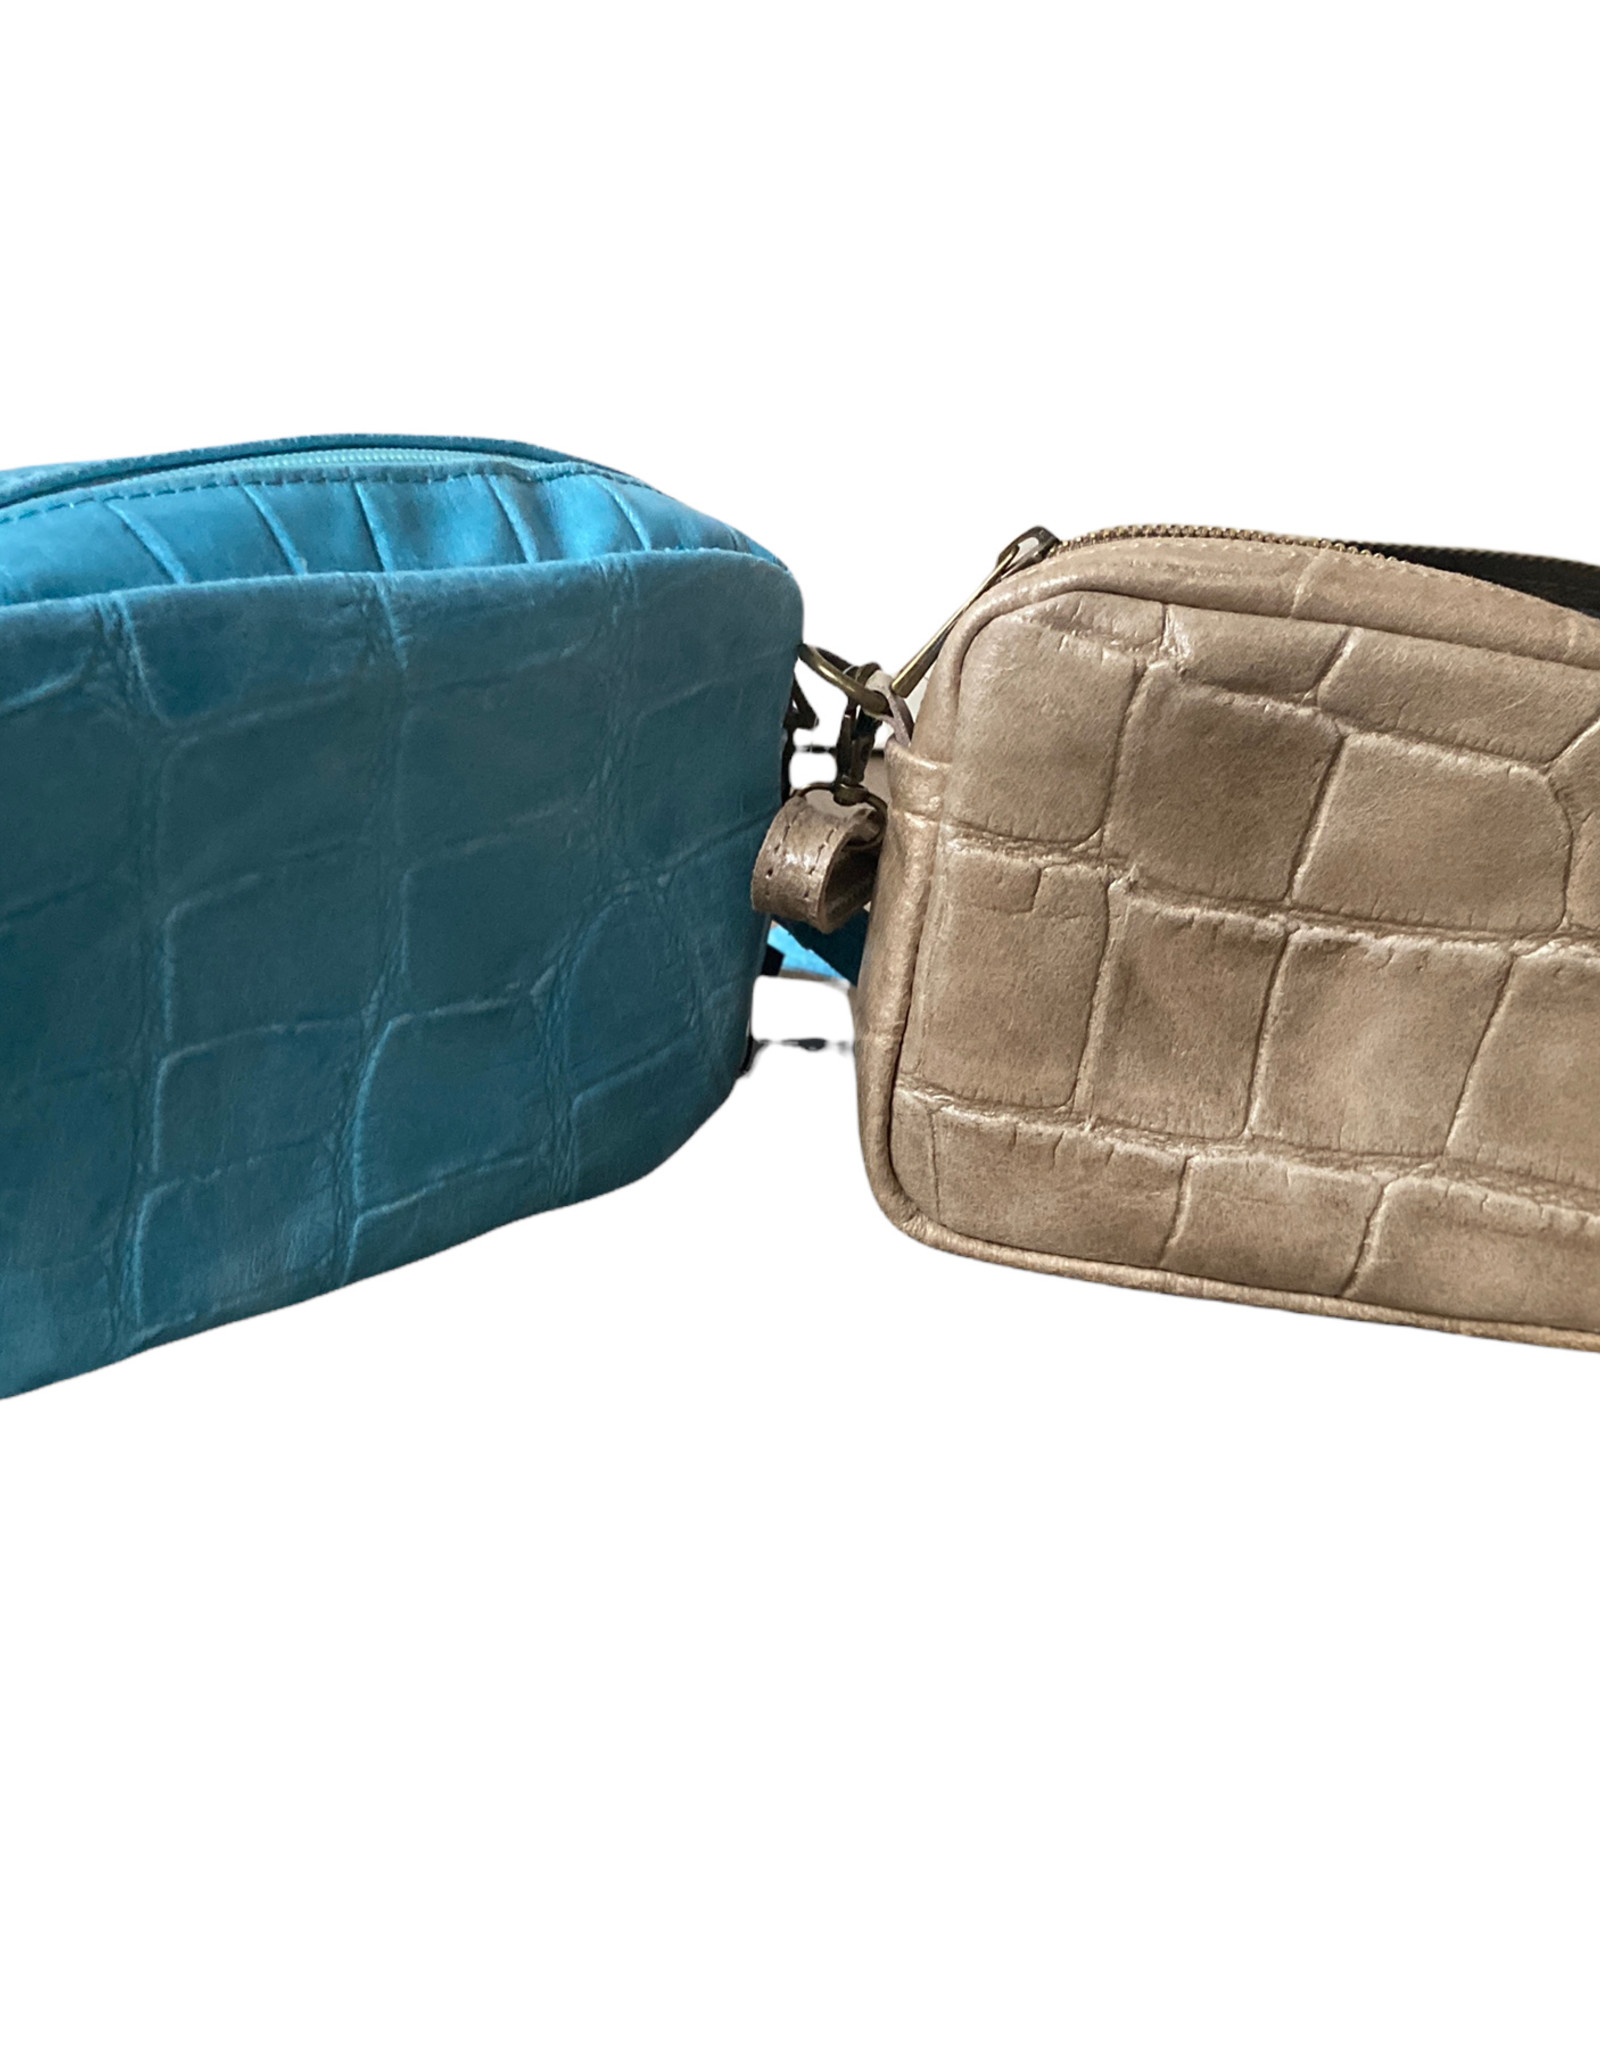 Little bag in croco leather, several colors